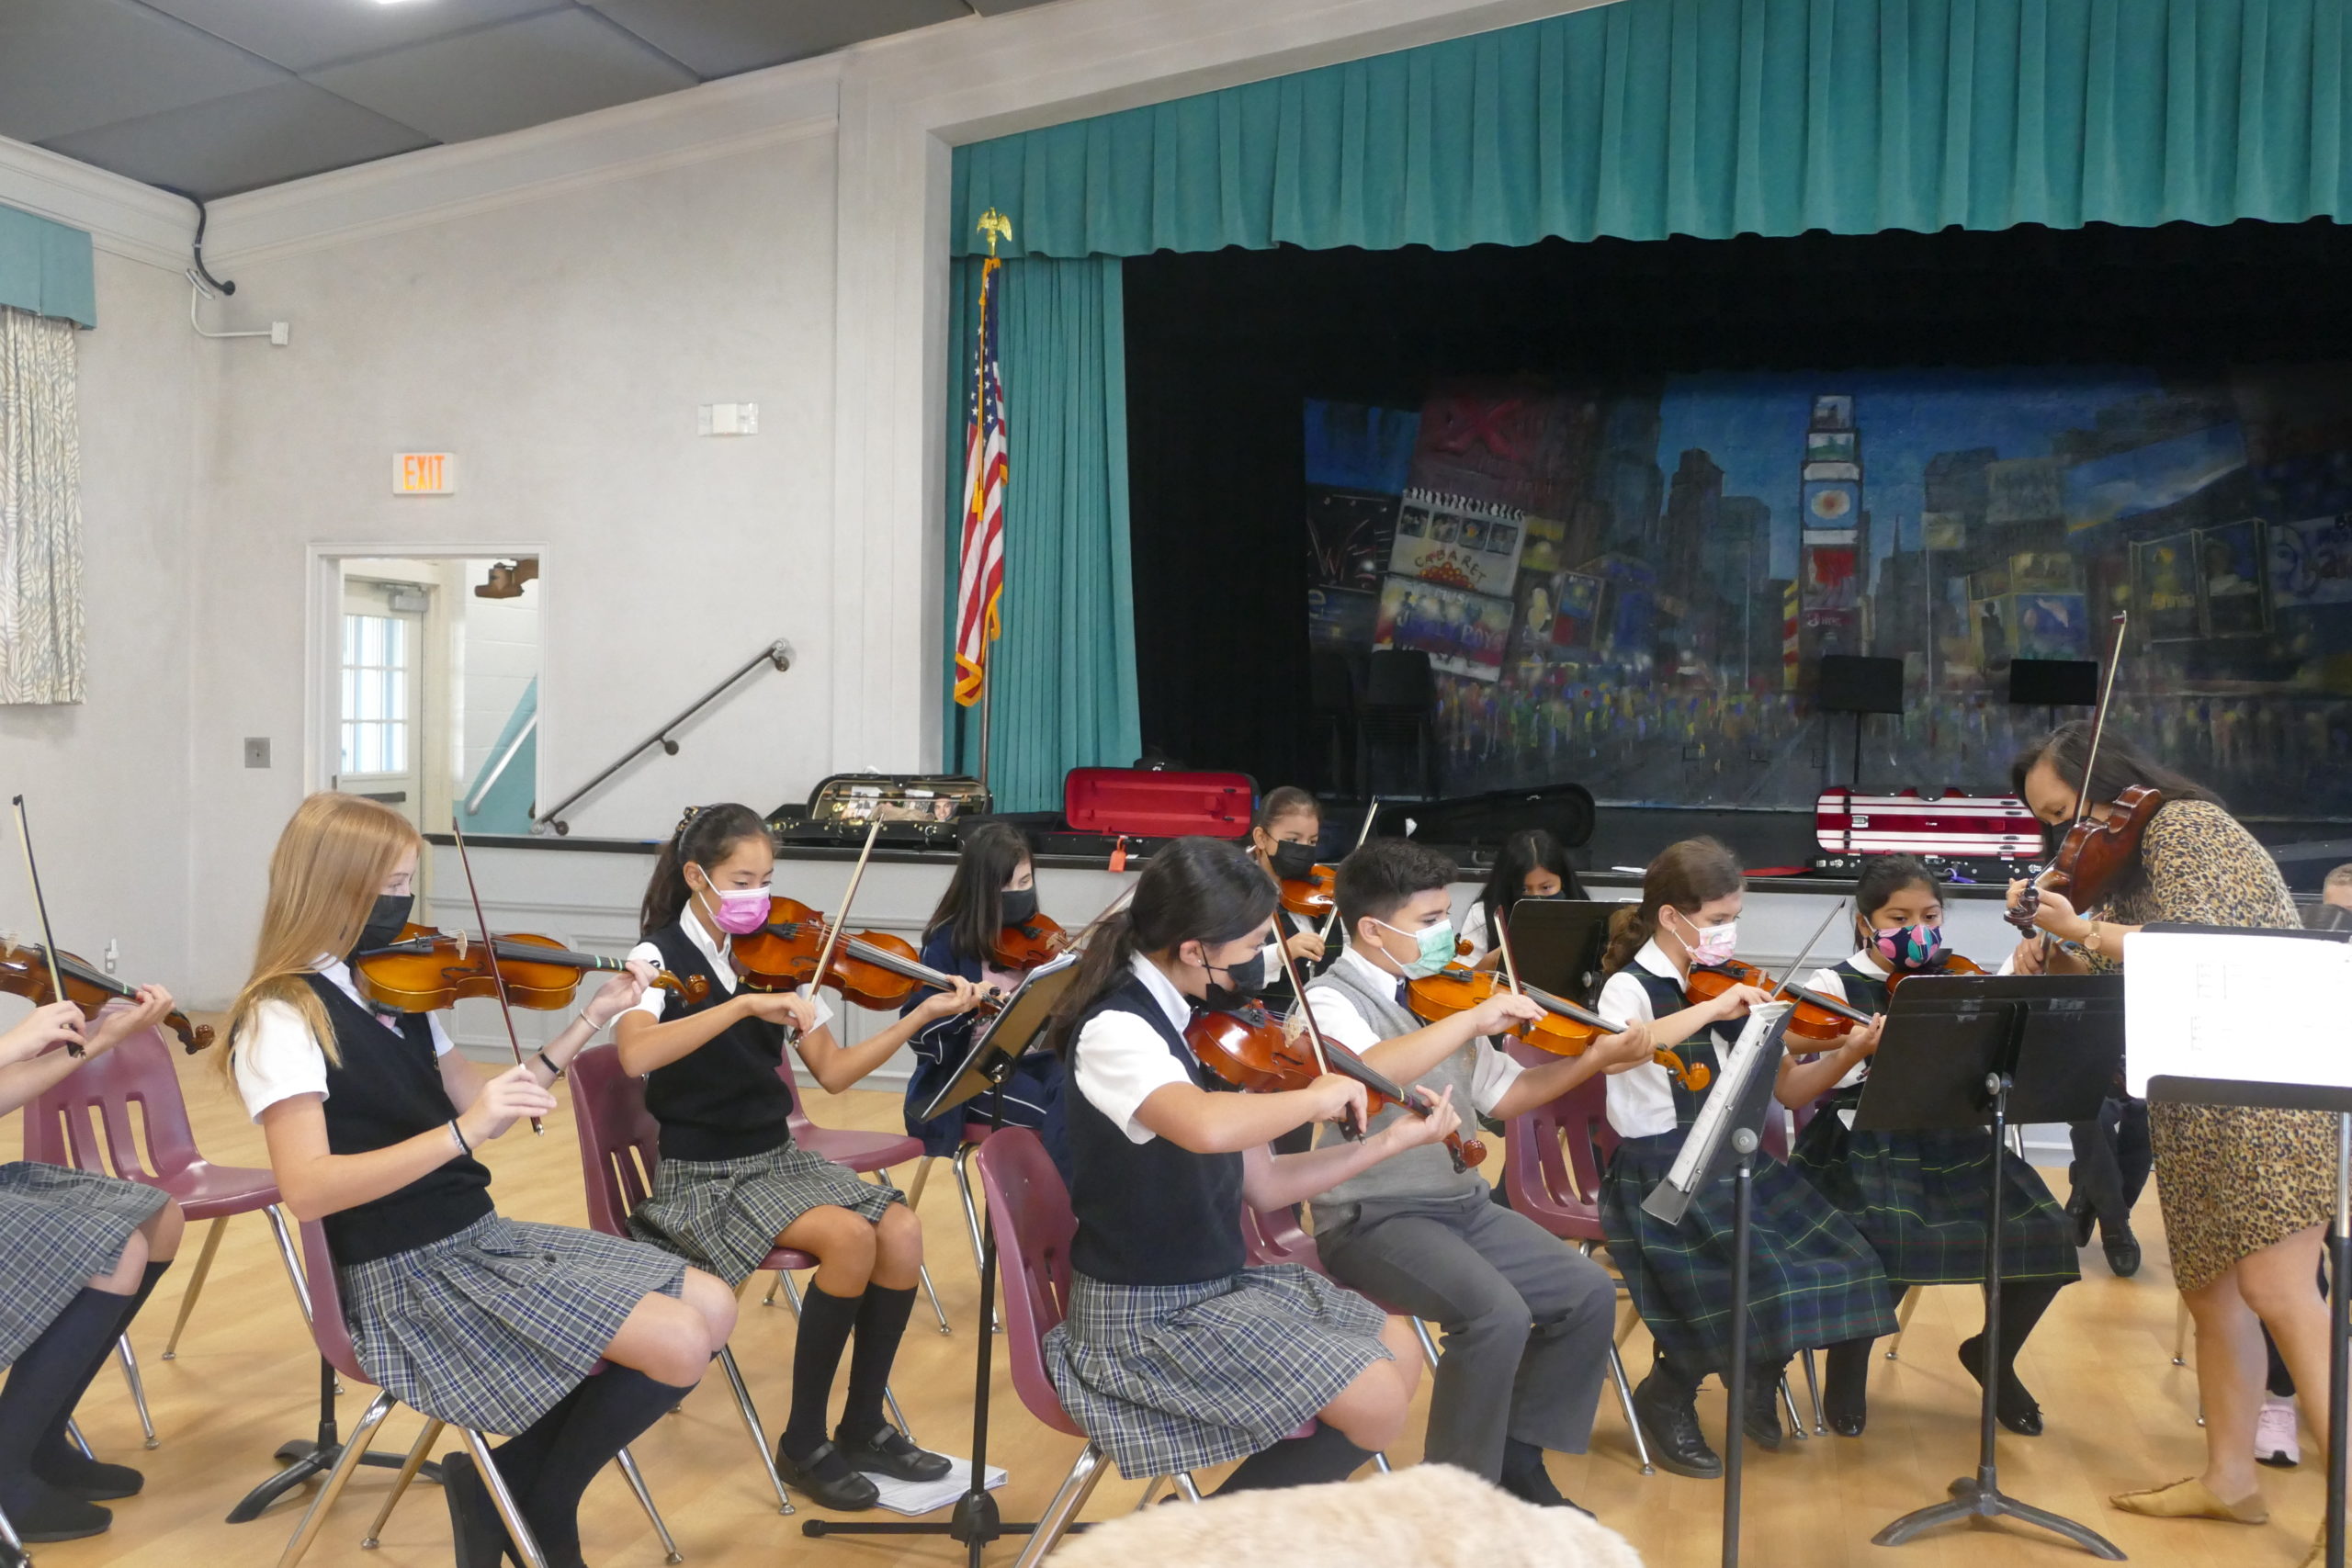 The fine arts program at Our Lady of the Hamptons School has expanded to include a string orchestra, directed by Song A. Shaughnessy. The 20 students are learning to play in a larger group, in addition to their bi-weekly lessons.